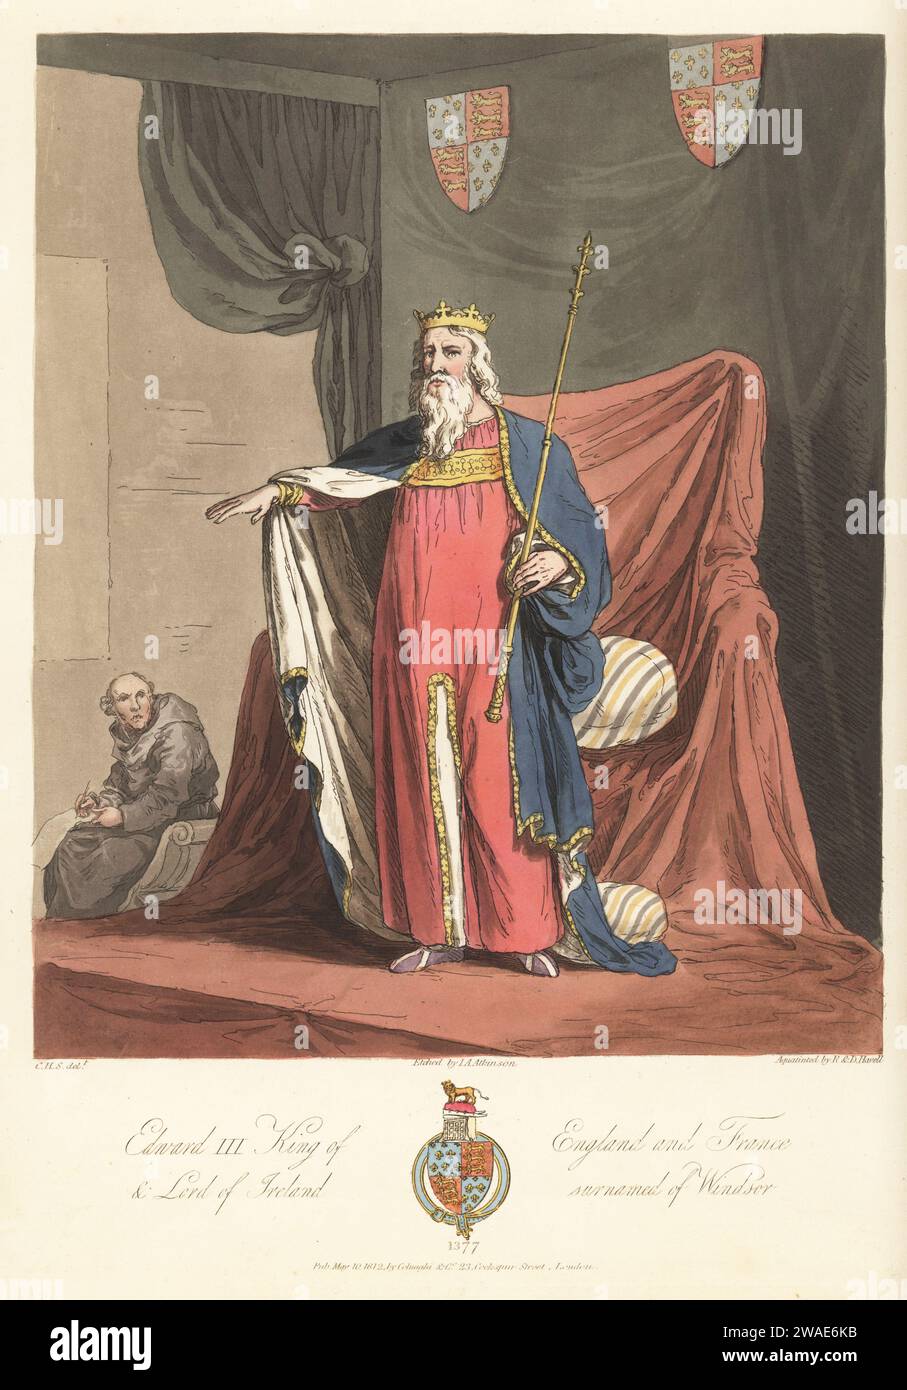 King Edward III of England and France, Lord of Ireland, surnamed of Windsor, 1377. In crown, fur-lined regal mantle and tunic, holding a sceptre. From his tomb effigy in Westminster Abbey. Throne and scribe writing on paper from Cotton MS Nero E II. Handcoloured copperplate engraving etched by John Augustus Atkinson, aquatinted by Robert and Daniel Havell, after an illustration by Charles Hamilton Smith from his own Selections of Ancient Costume of Great Britain and Ireland, Colnaghi and Co., London, 1814. Stock Photo